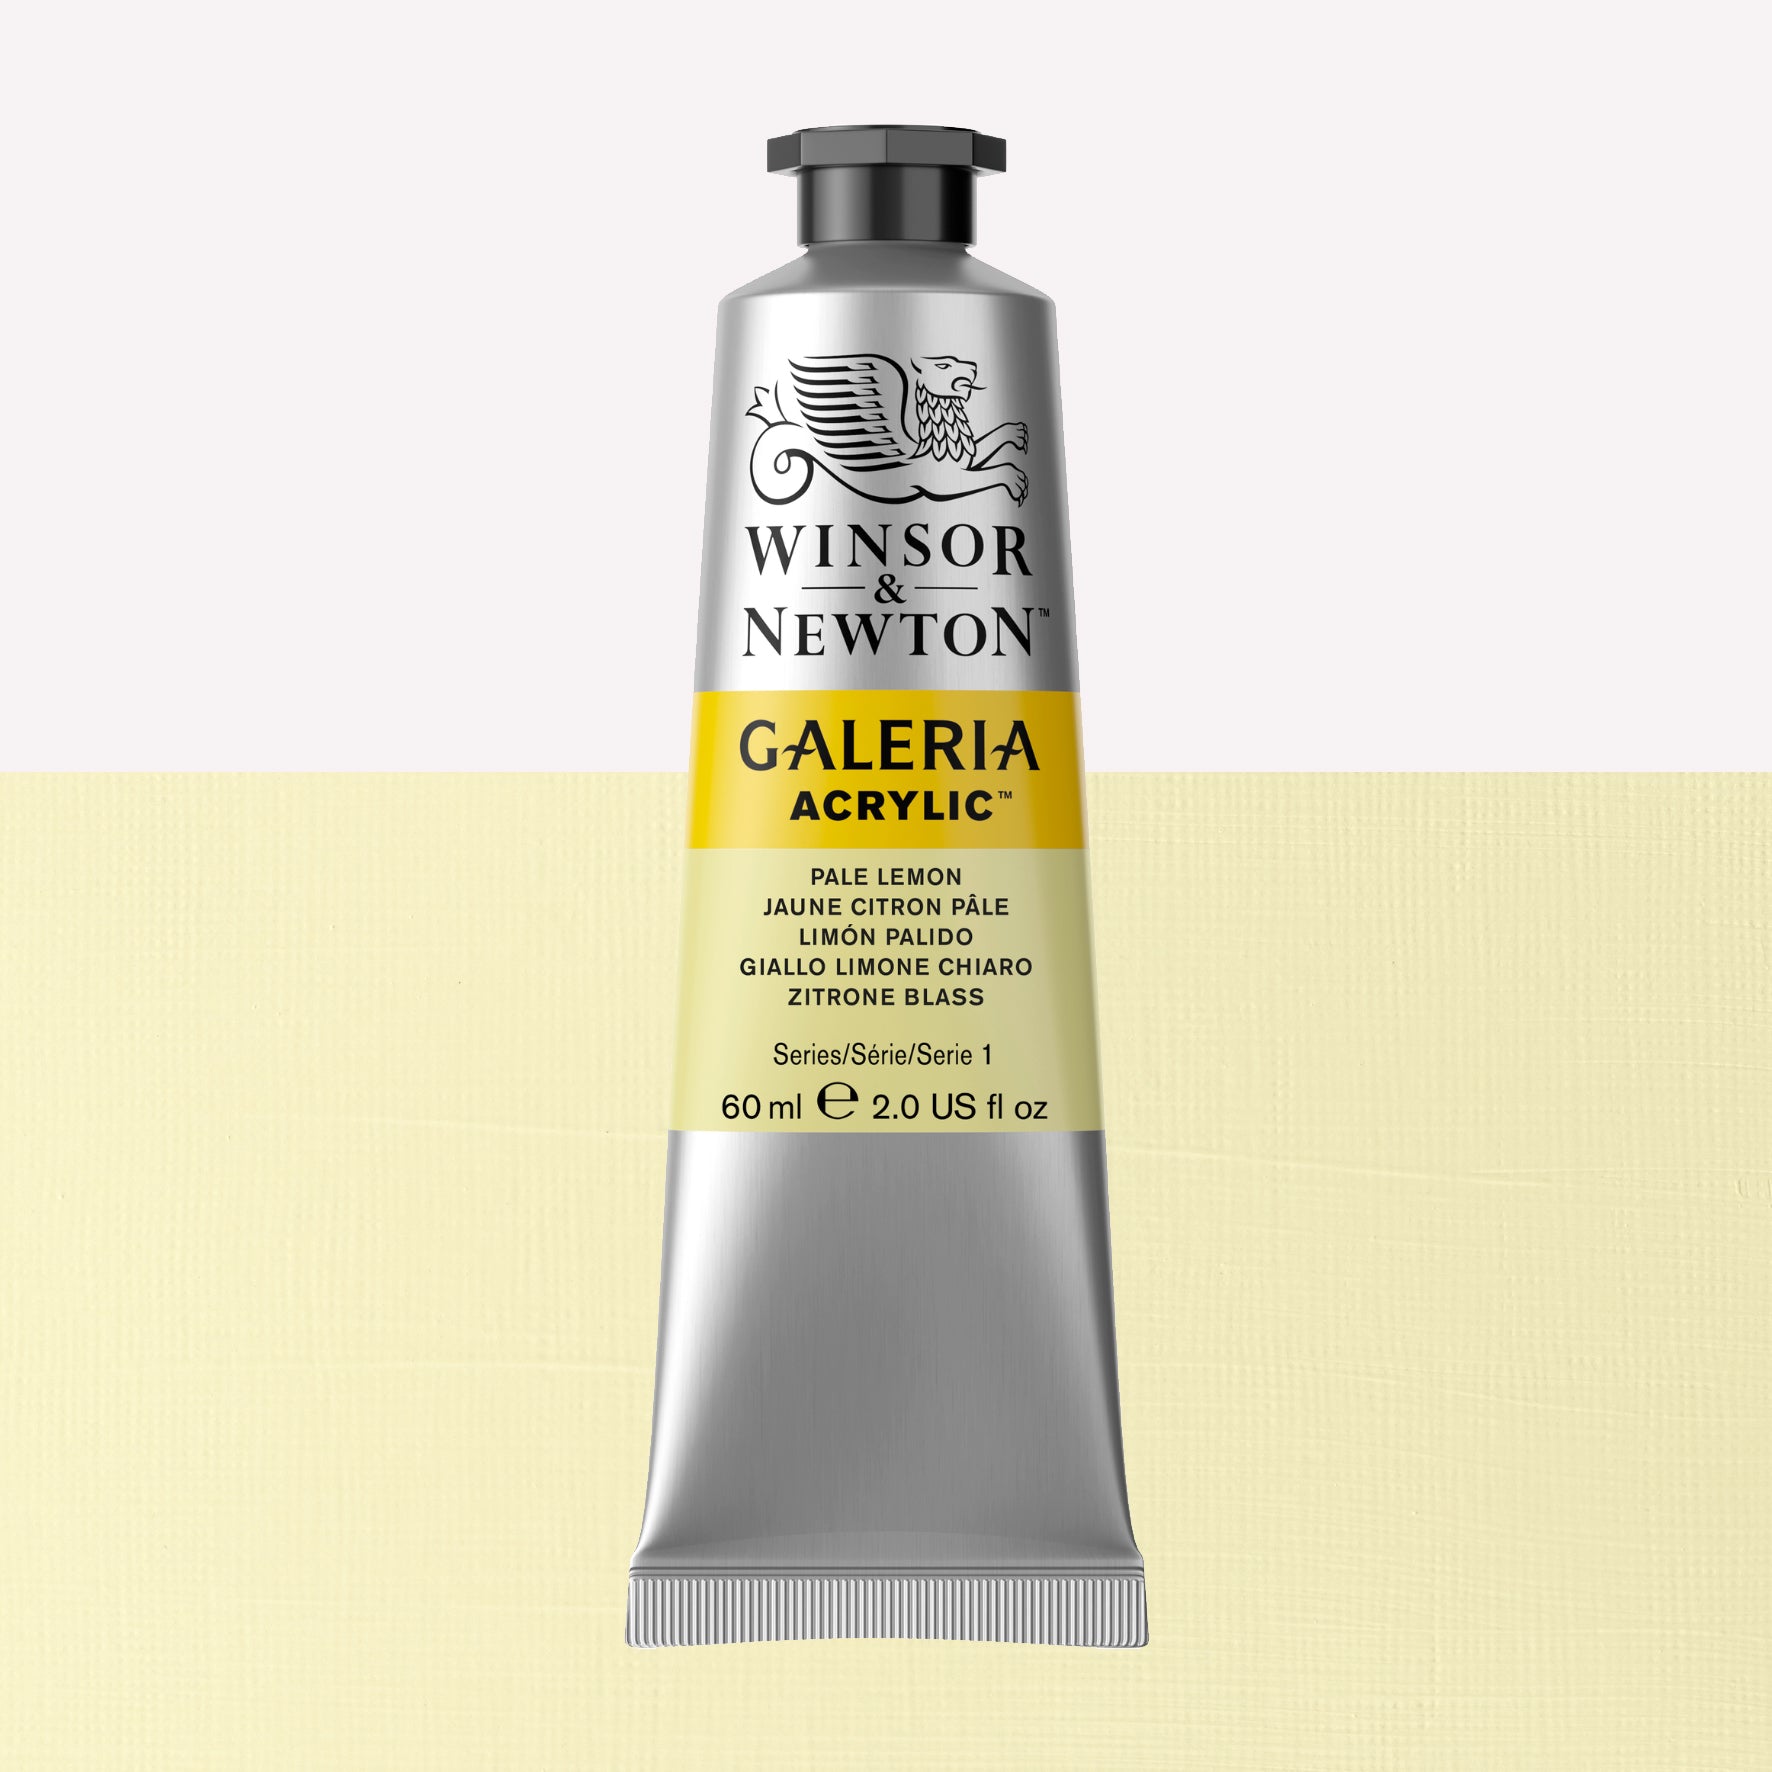 A 60ml tube of vibrant Galeria Acrylic paint in the shade Pale Lemon. This paint, made by Winsor and Newton, is packaged in a silver tube with a black lid. 